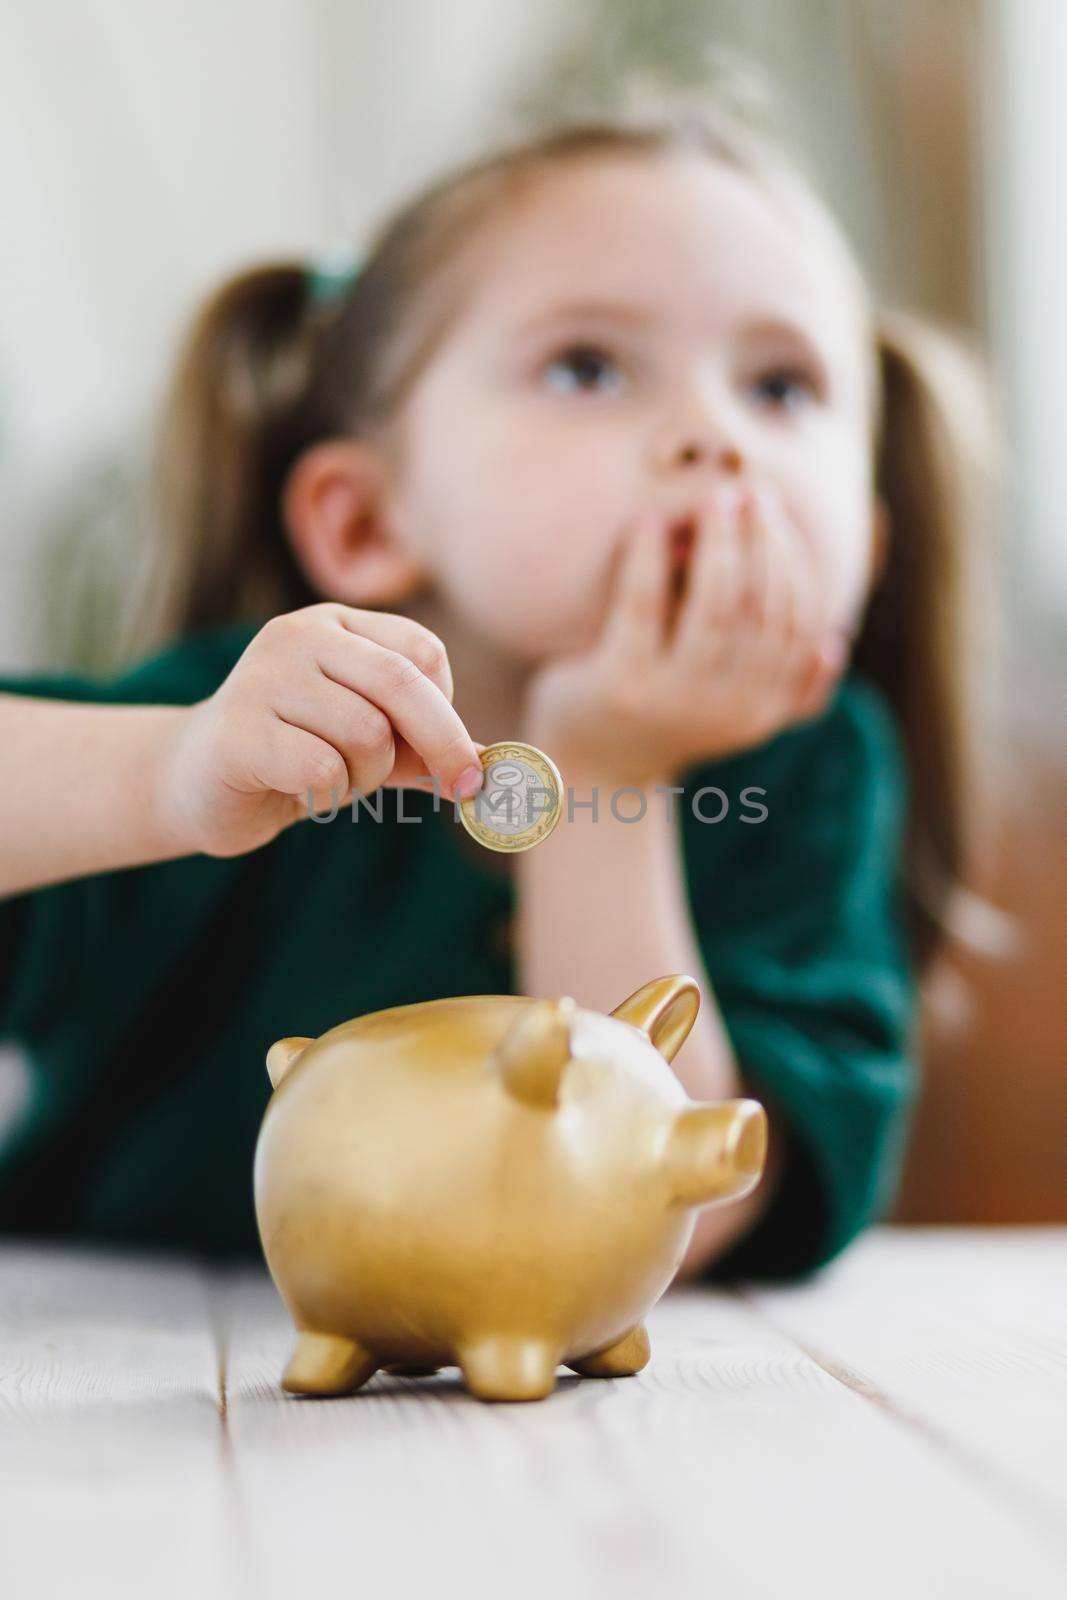 Little girl thinking about her money spending and putting a coin into a piggy bank. Economy, money saving and deposit concept. Selective soft focus